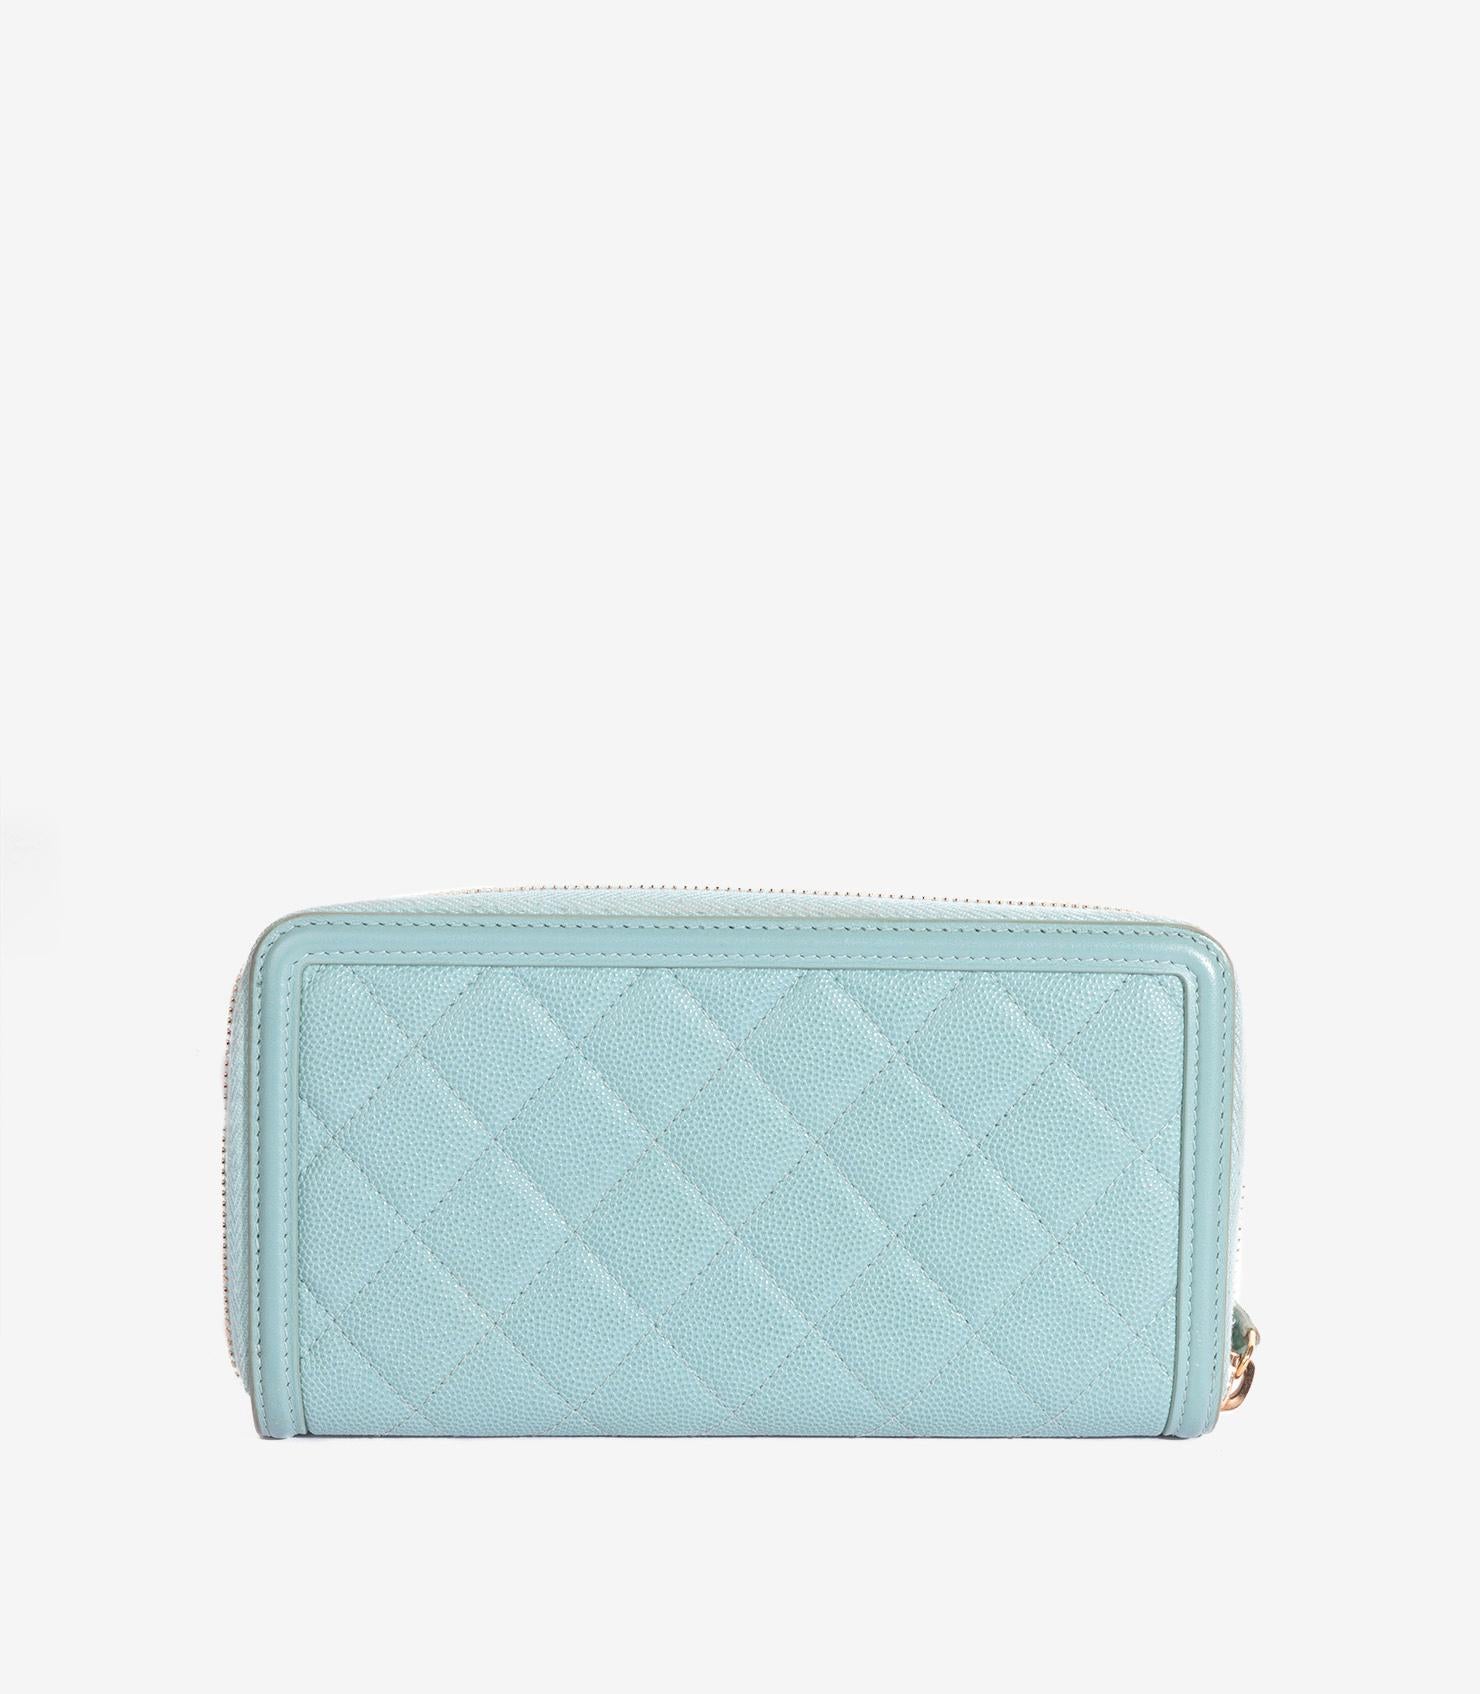 Chanel Light Blue Caviar Quilted Leather CC Filigree Zip Wallet In Excellent Condition For Sale In Bishop's Stortford, Hertfordshire